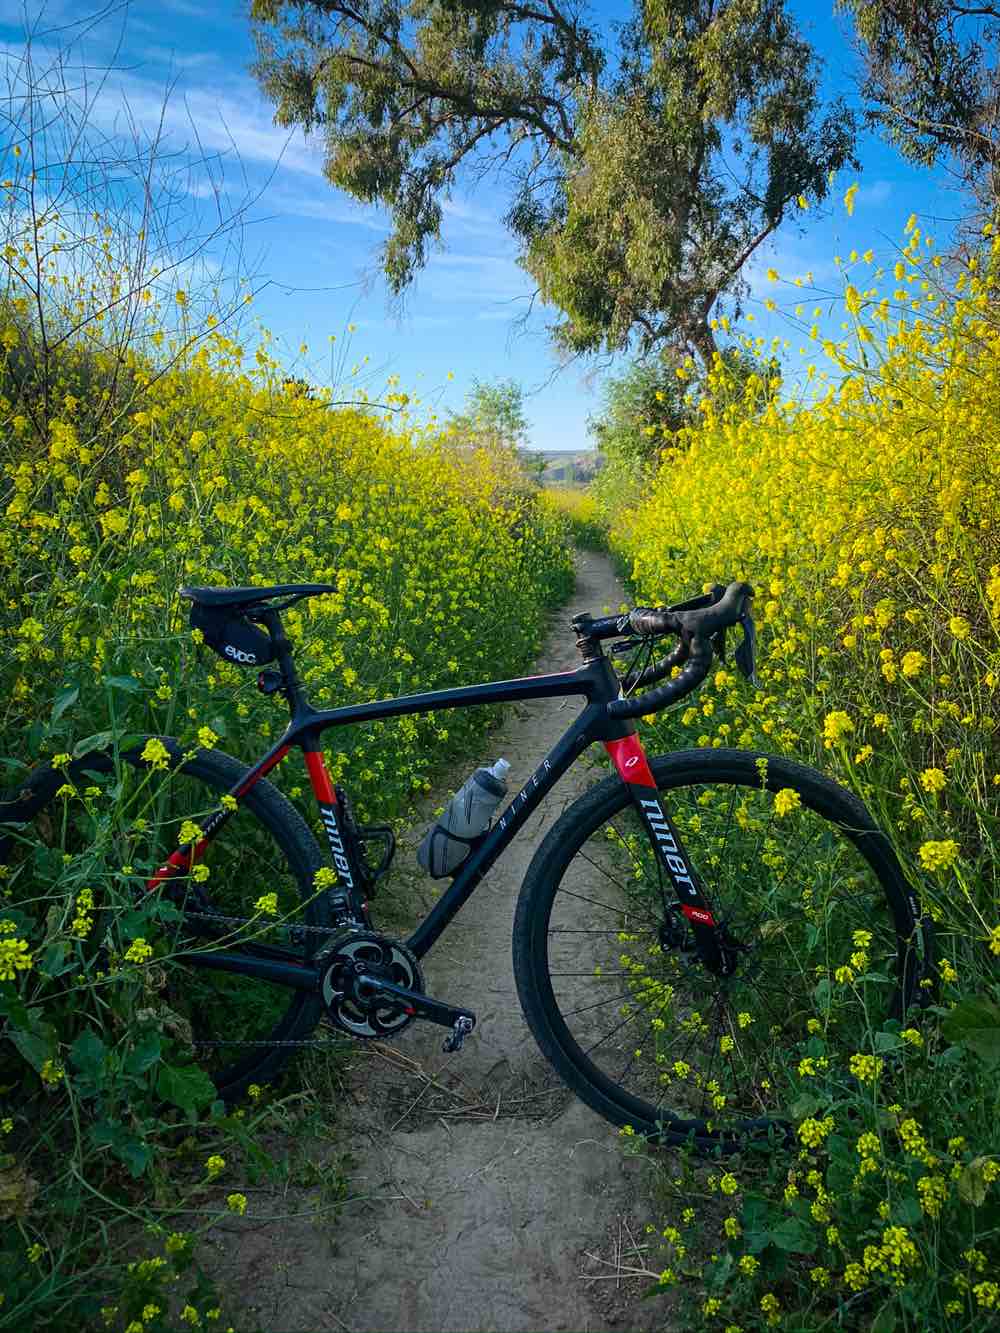 bikerumor pic of the day niner bicycle across a dirt path surrounded by mustard plants in full bloom in irvine regional park in orange california.